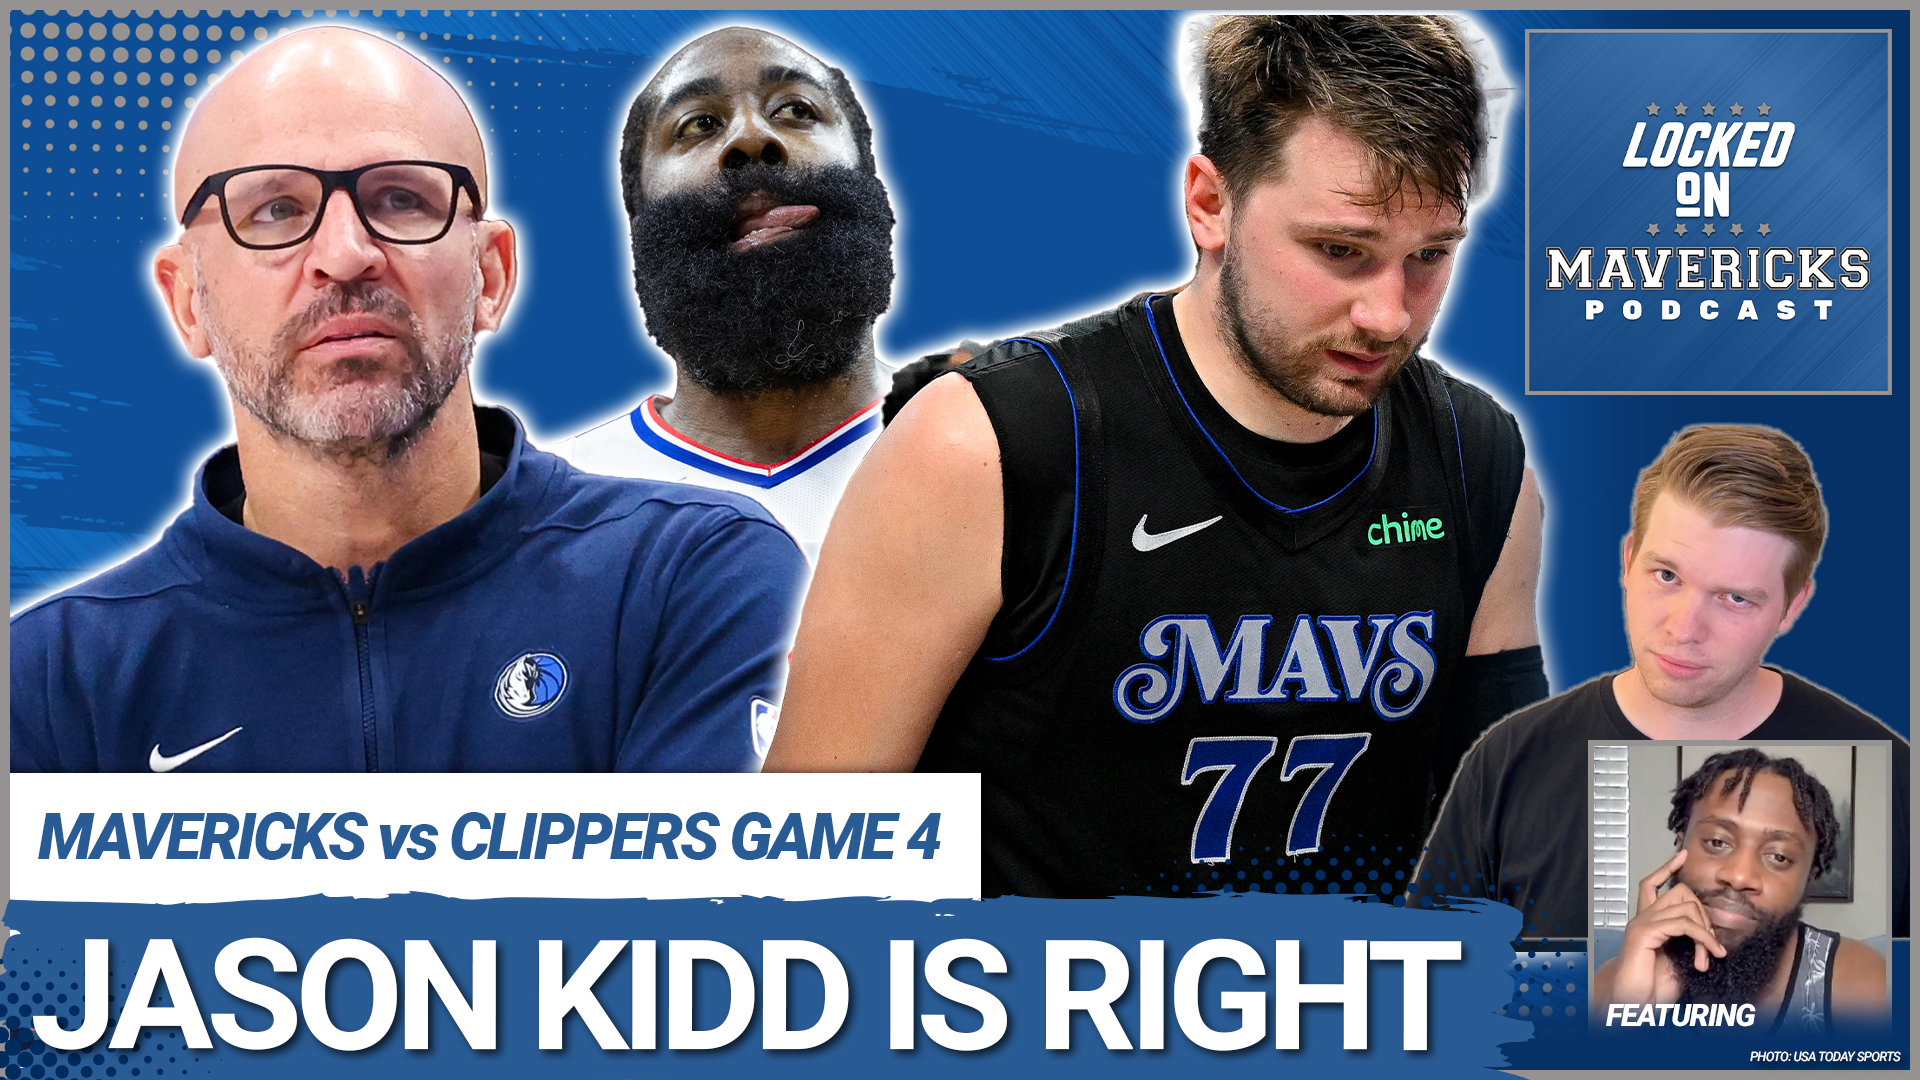 Nick Angstadt & Reggie Adetula explain why Jason Kidd is right about the Dallas Mavericks' strategy against the Clippers and what Luka Doncic & Kyrie Irving can do.